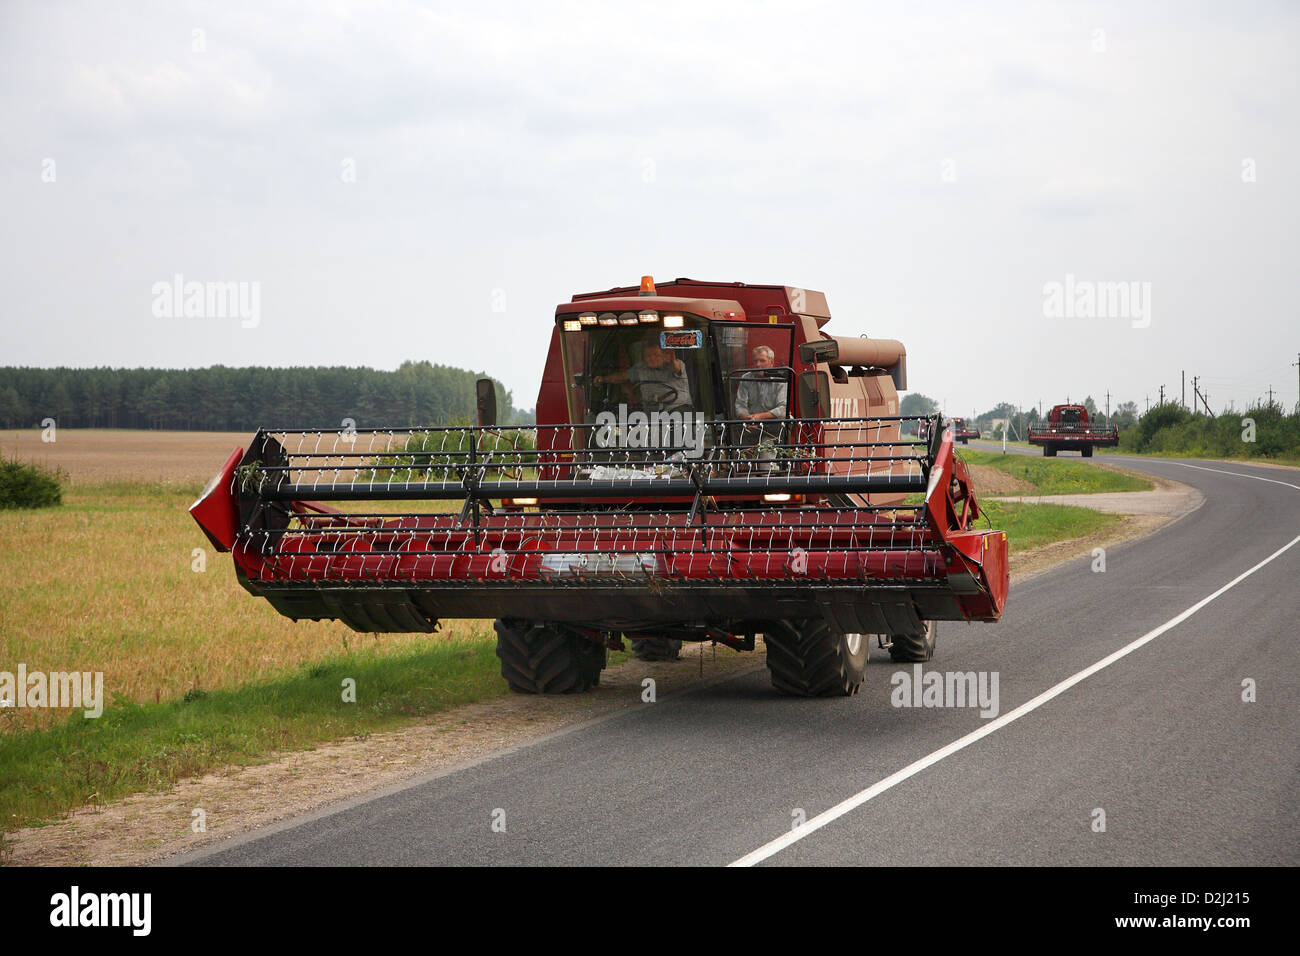 wadol-belarus-combine-harvester-a-collective-farm-on-a-country-road-D2J215.jpg